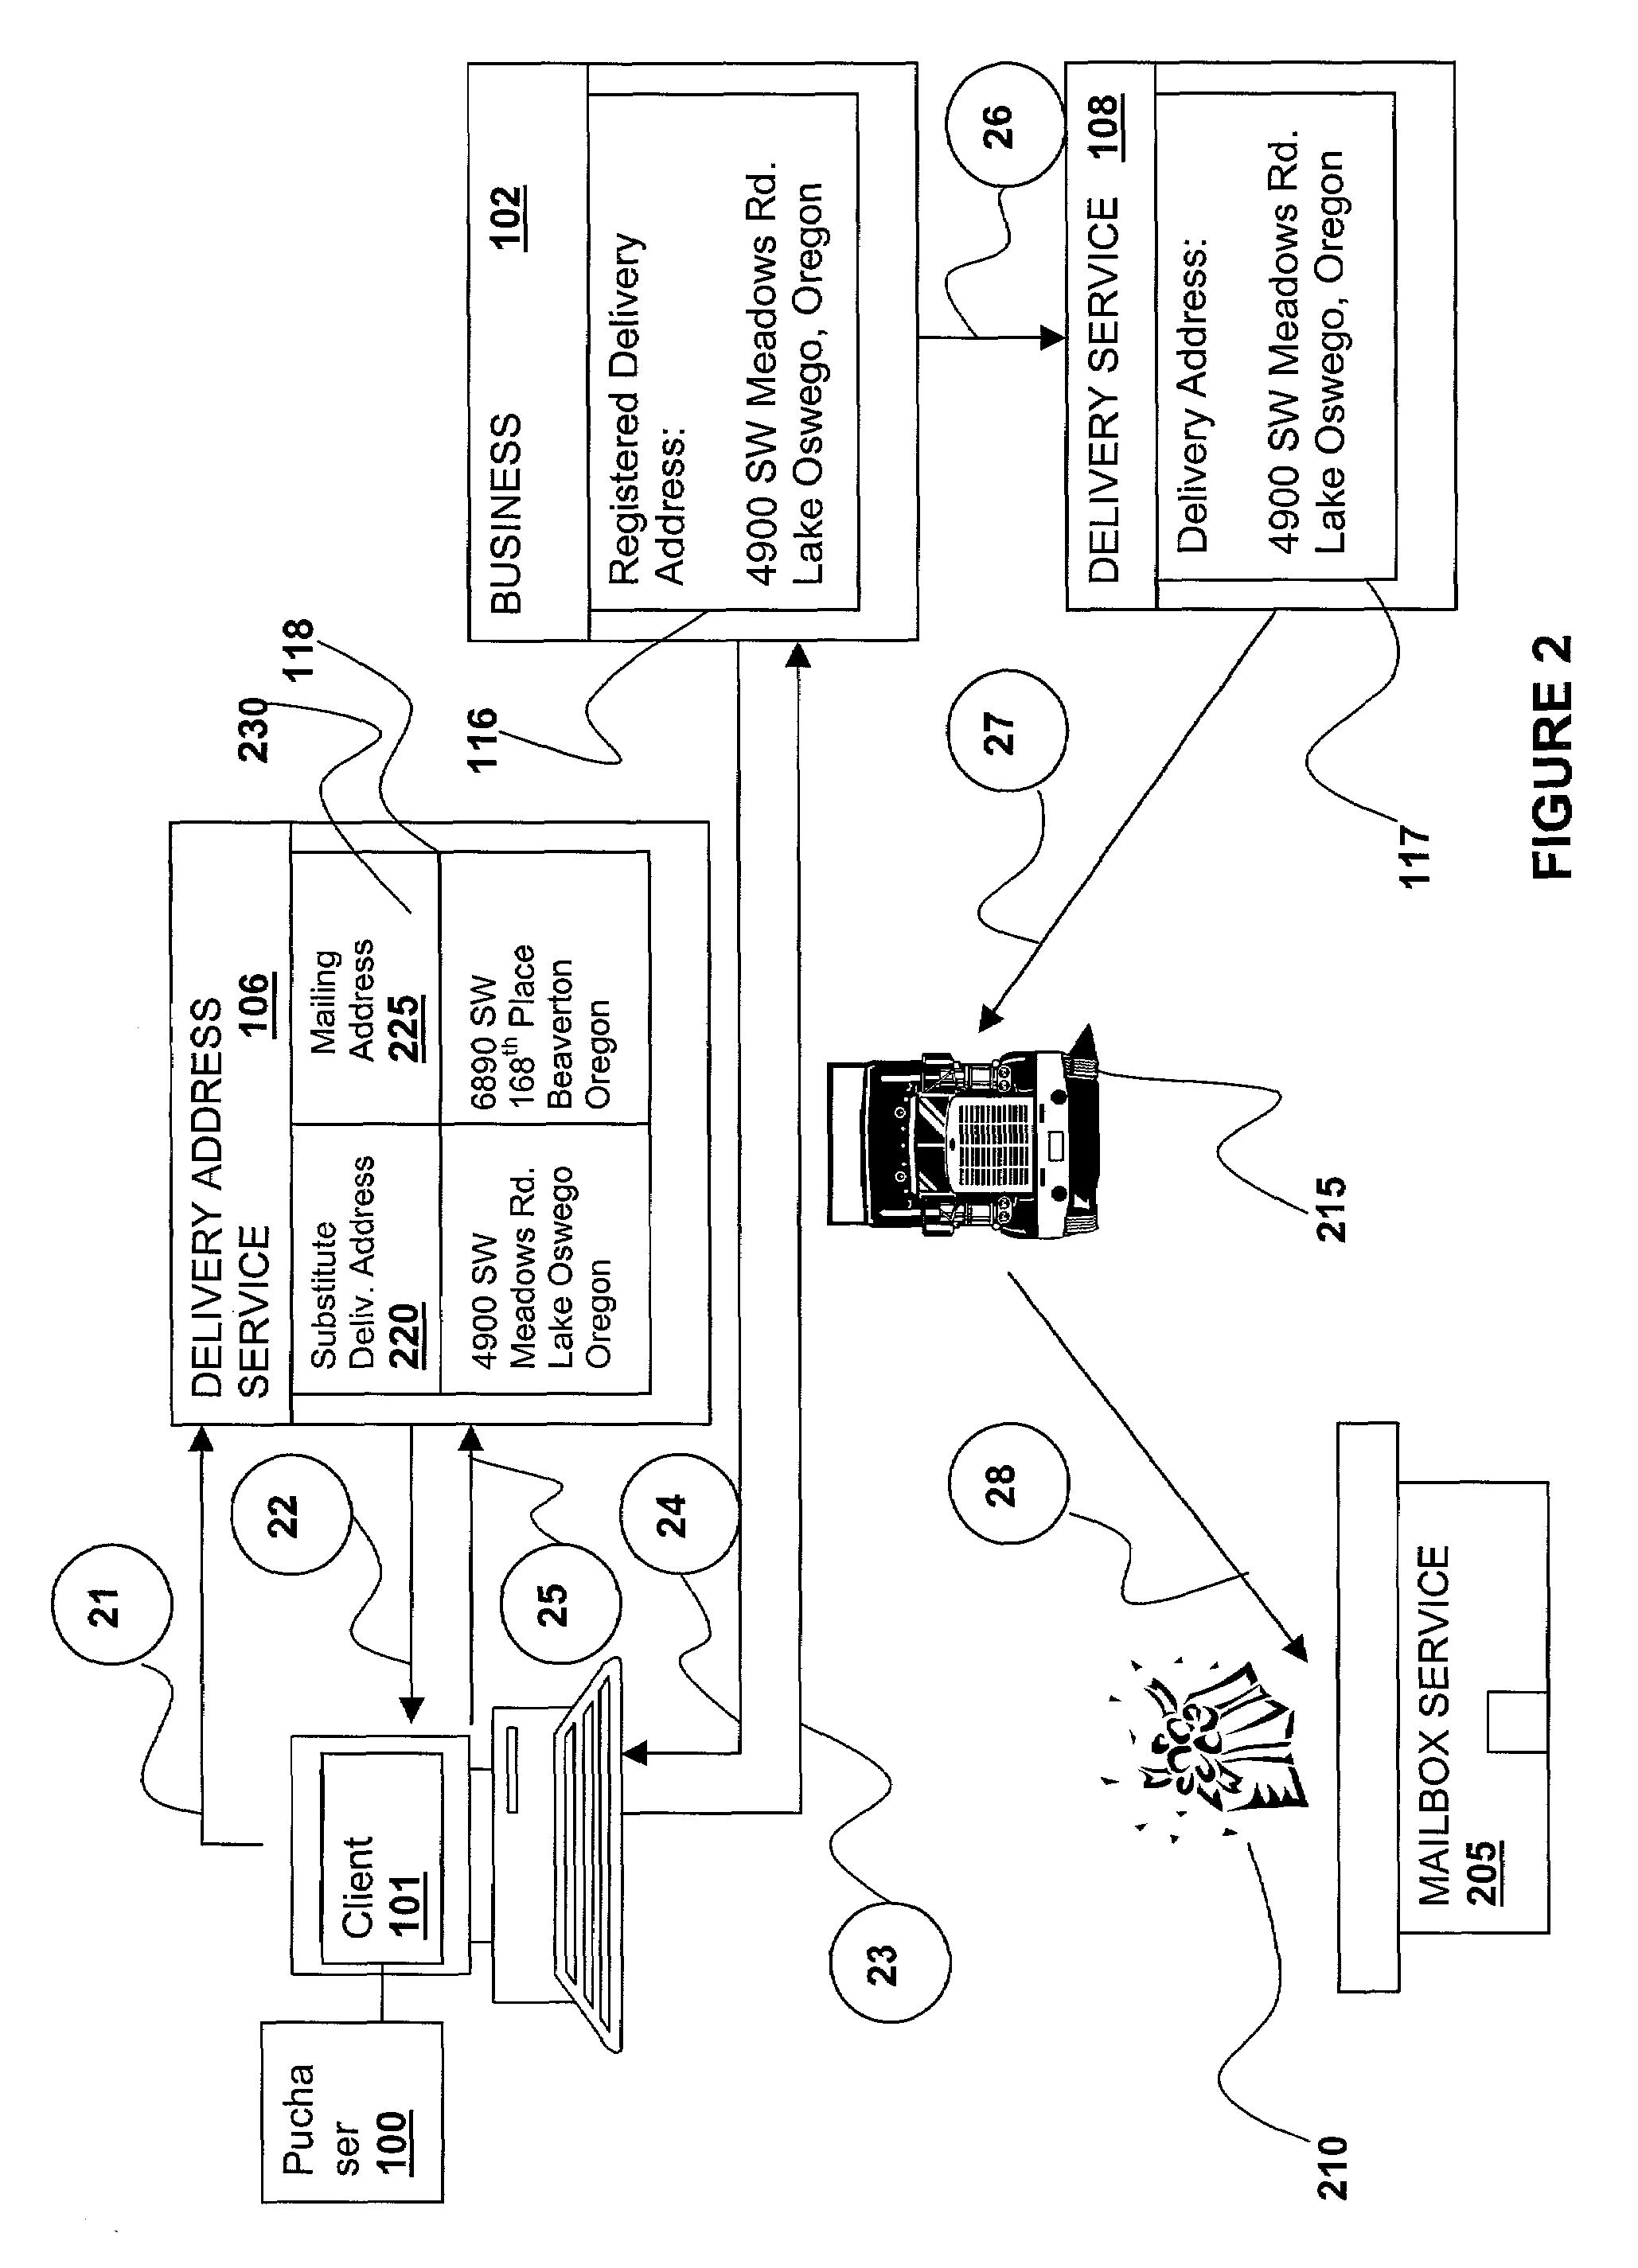 Method and apparatus for masking private mailing address information by manipulating delivery transactions